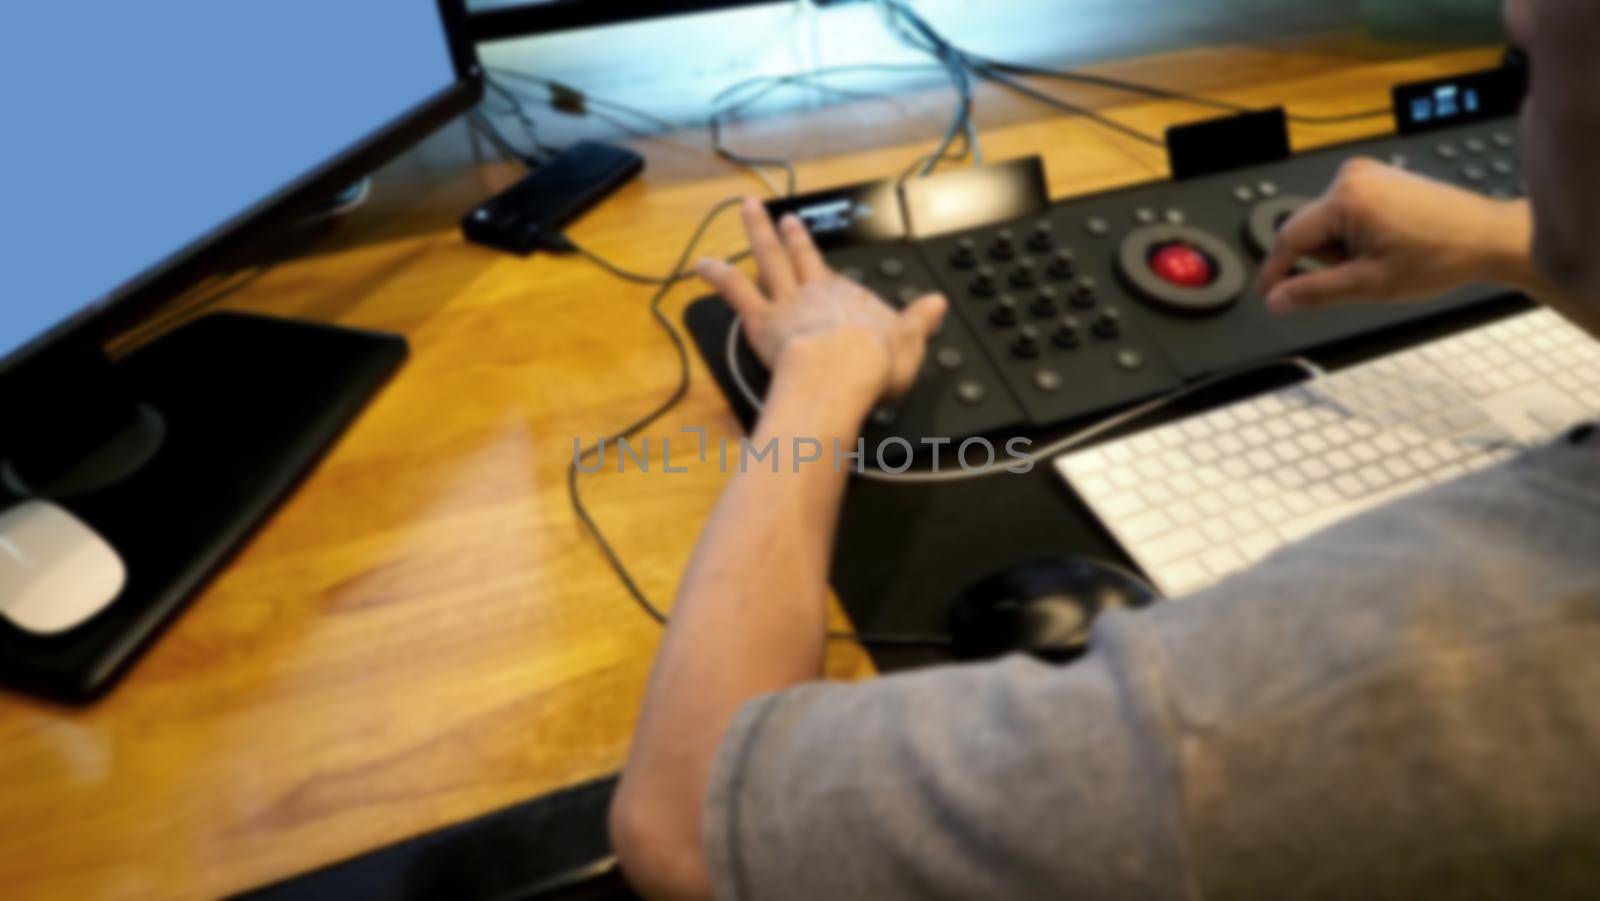 Blurry images of telecine controller machine and colorist man hand editing or adjusting color on digital video movie or film in the post production stage which very technical in the dark room lab.